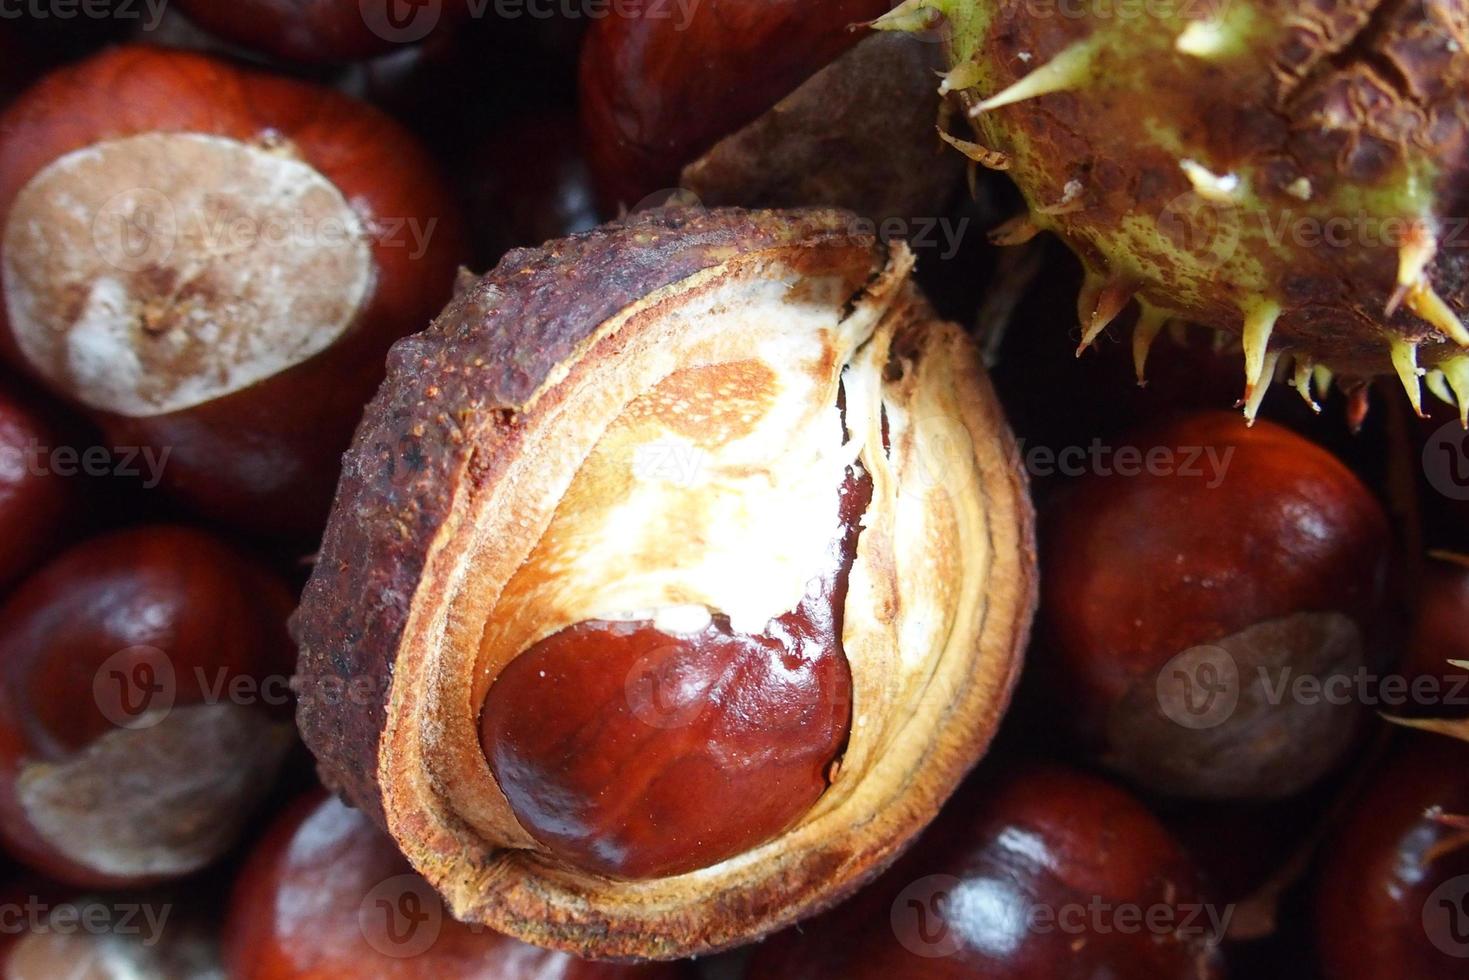 brown chestnuts collected on an autumn day photo